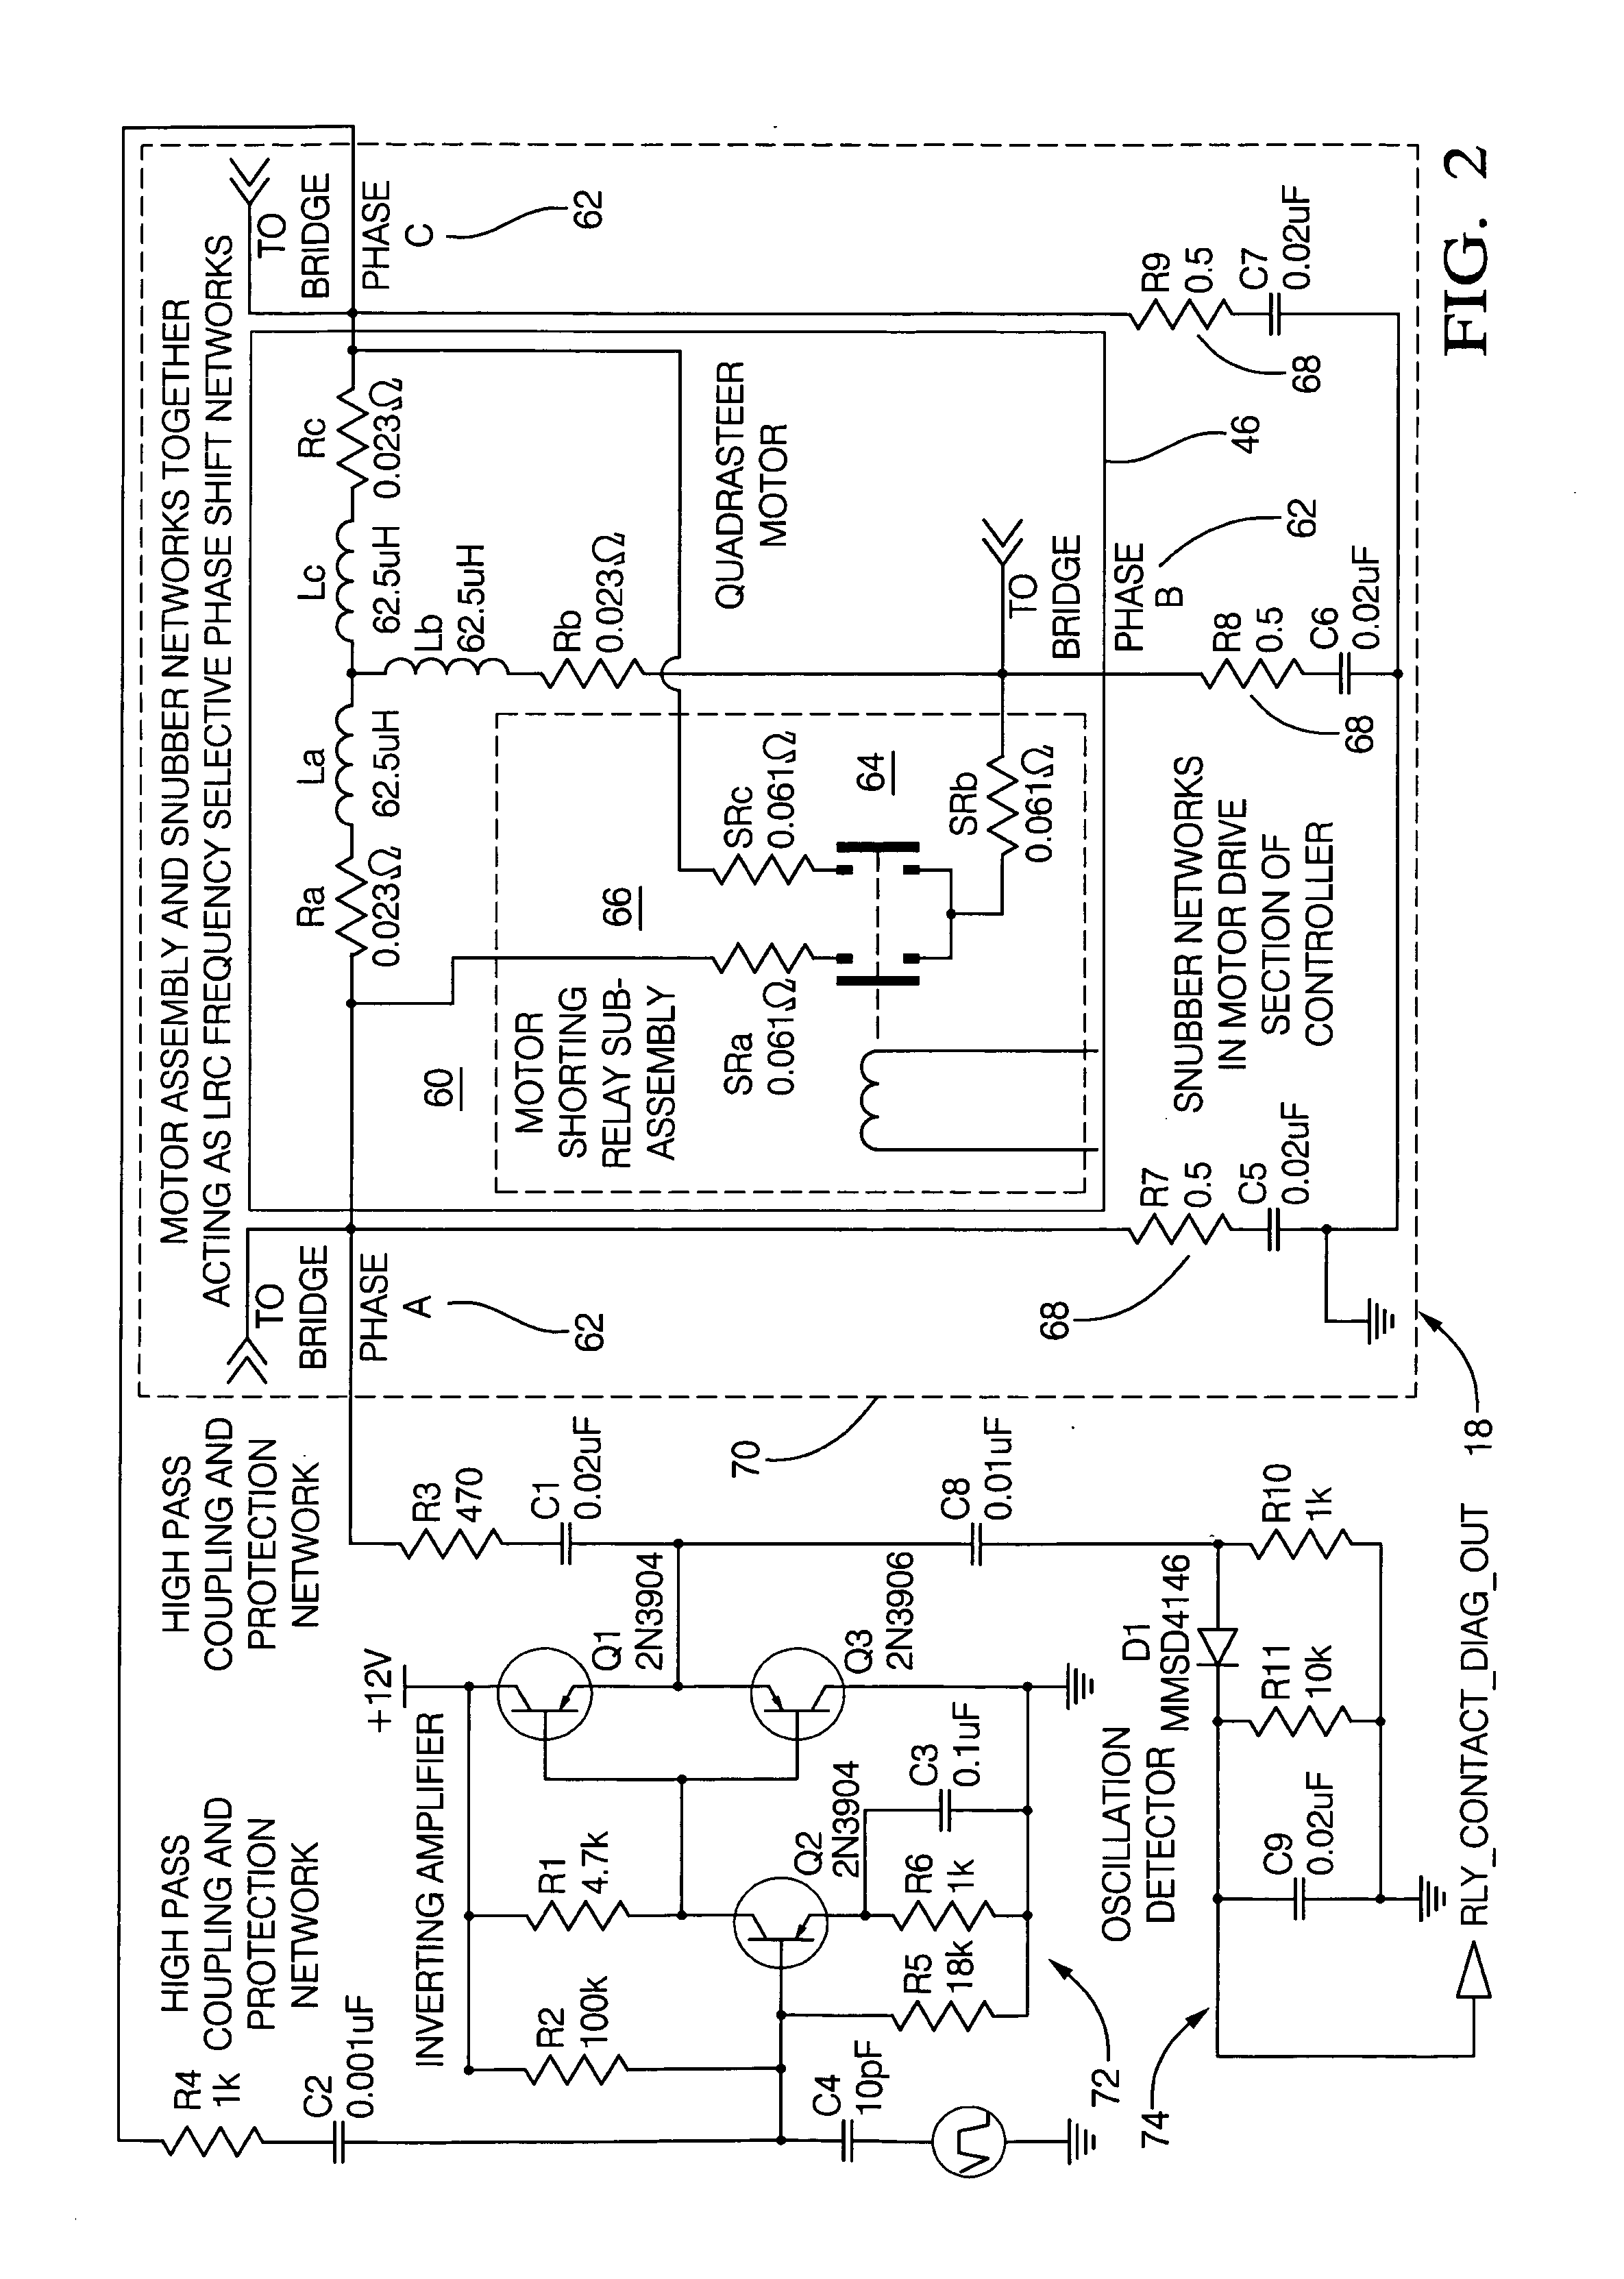 Method and apparatus for diagnosing motor damping network integrity